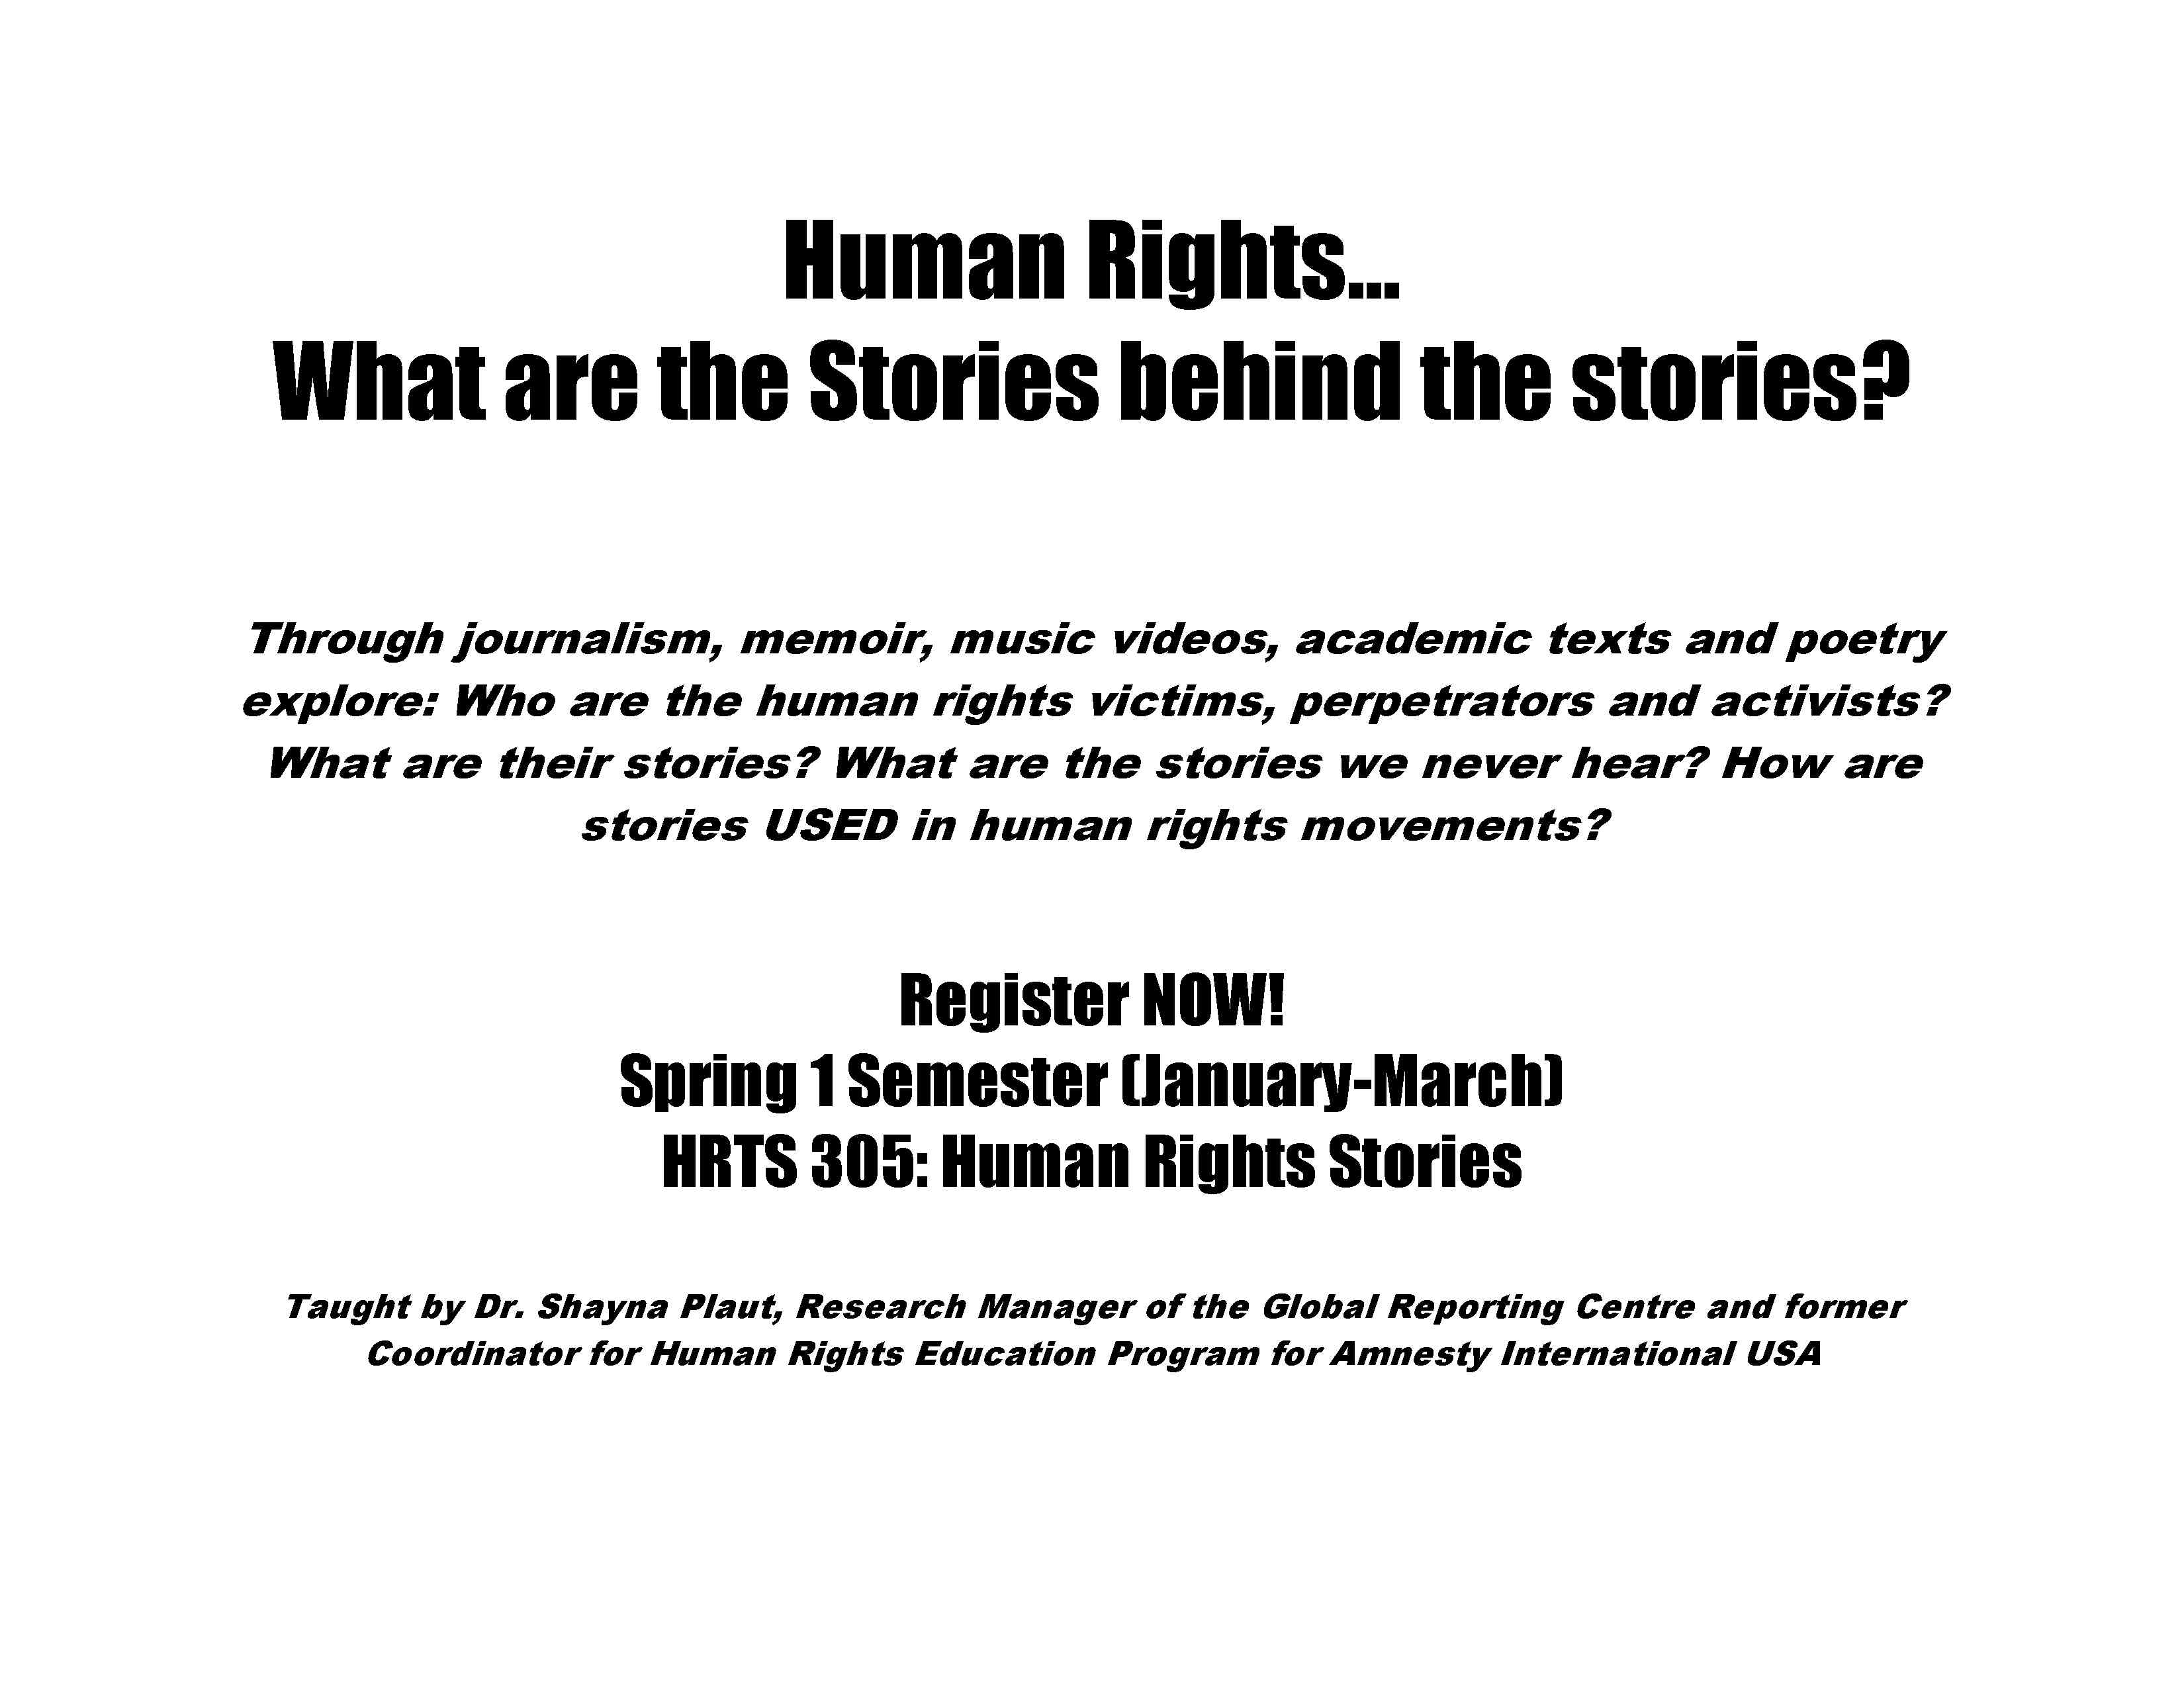 HRTS 305 -- Human Rights Stories